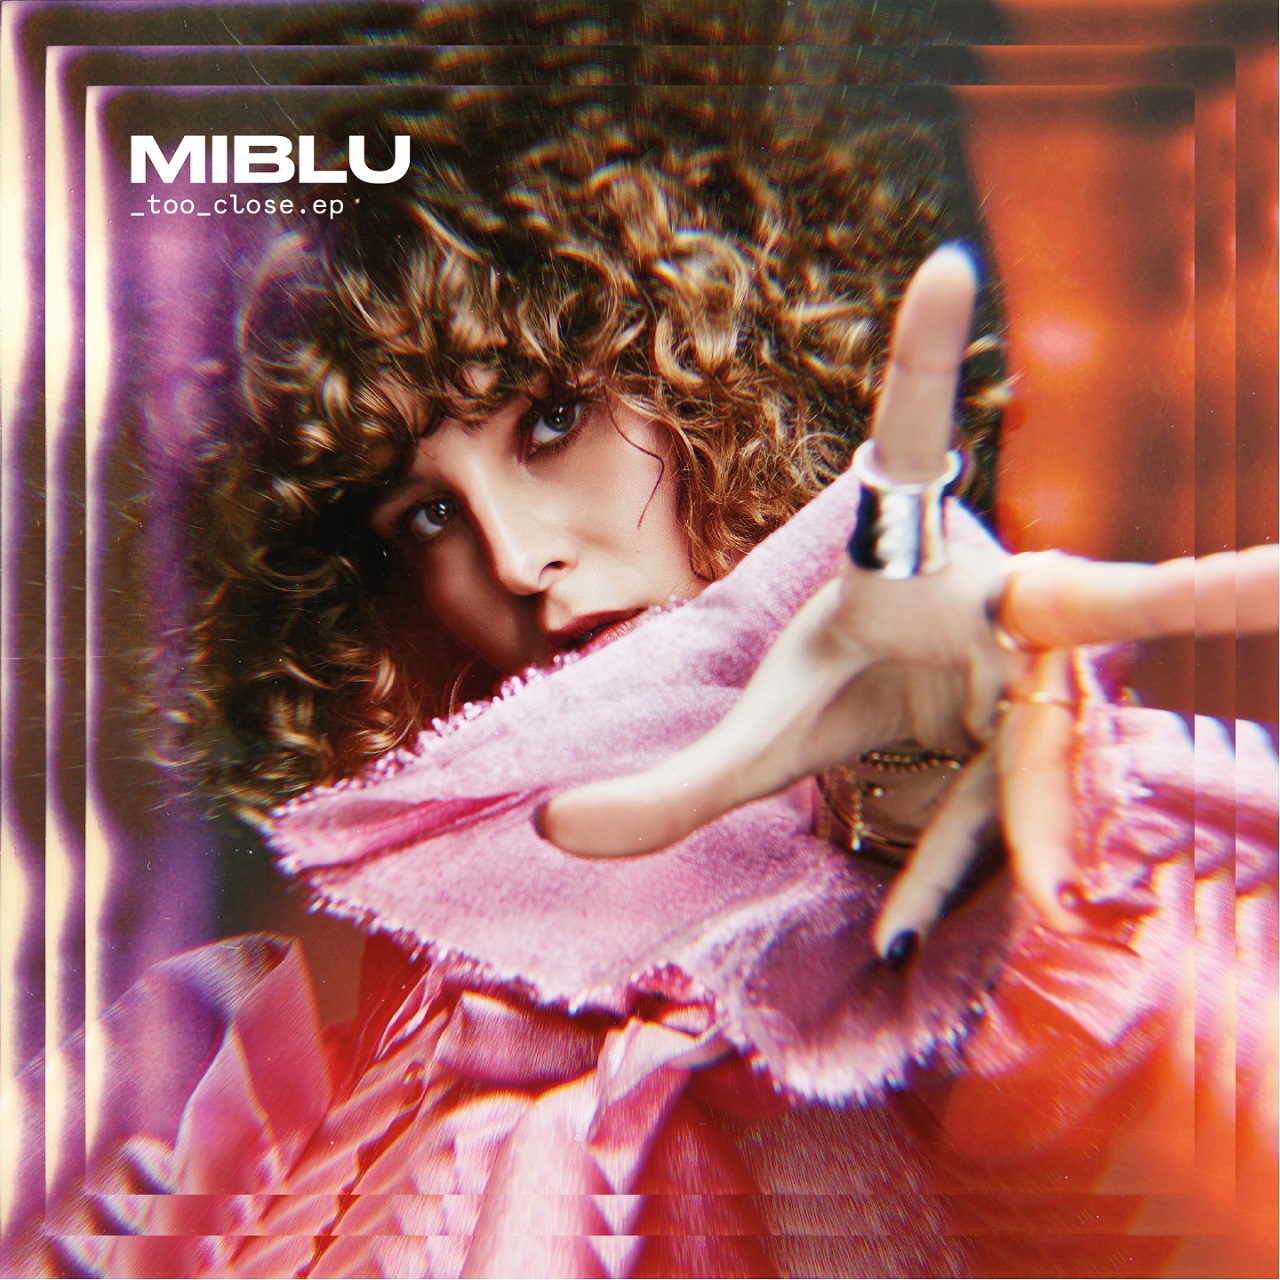 Miblu Cover EP "Too Close"